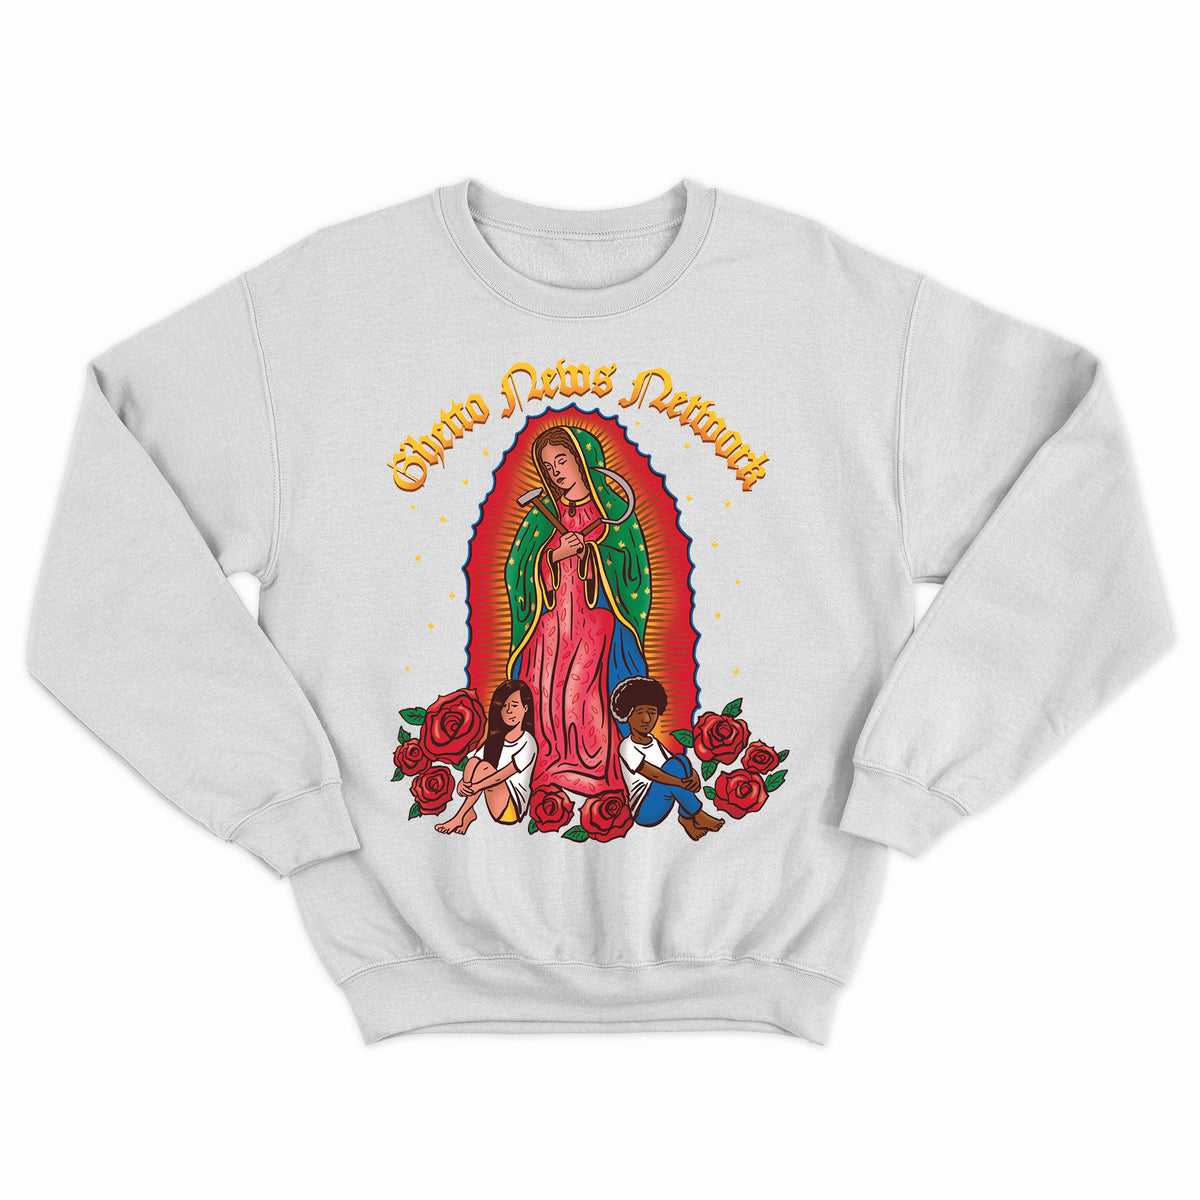 Shop and Buy Ghetto News Network Sweater